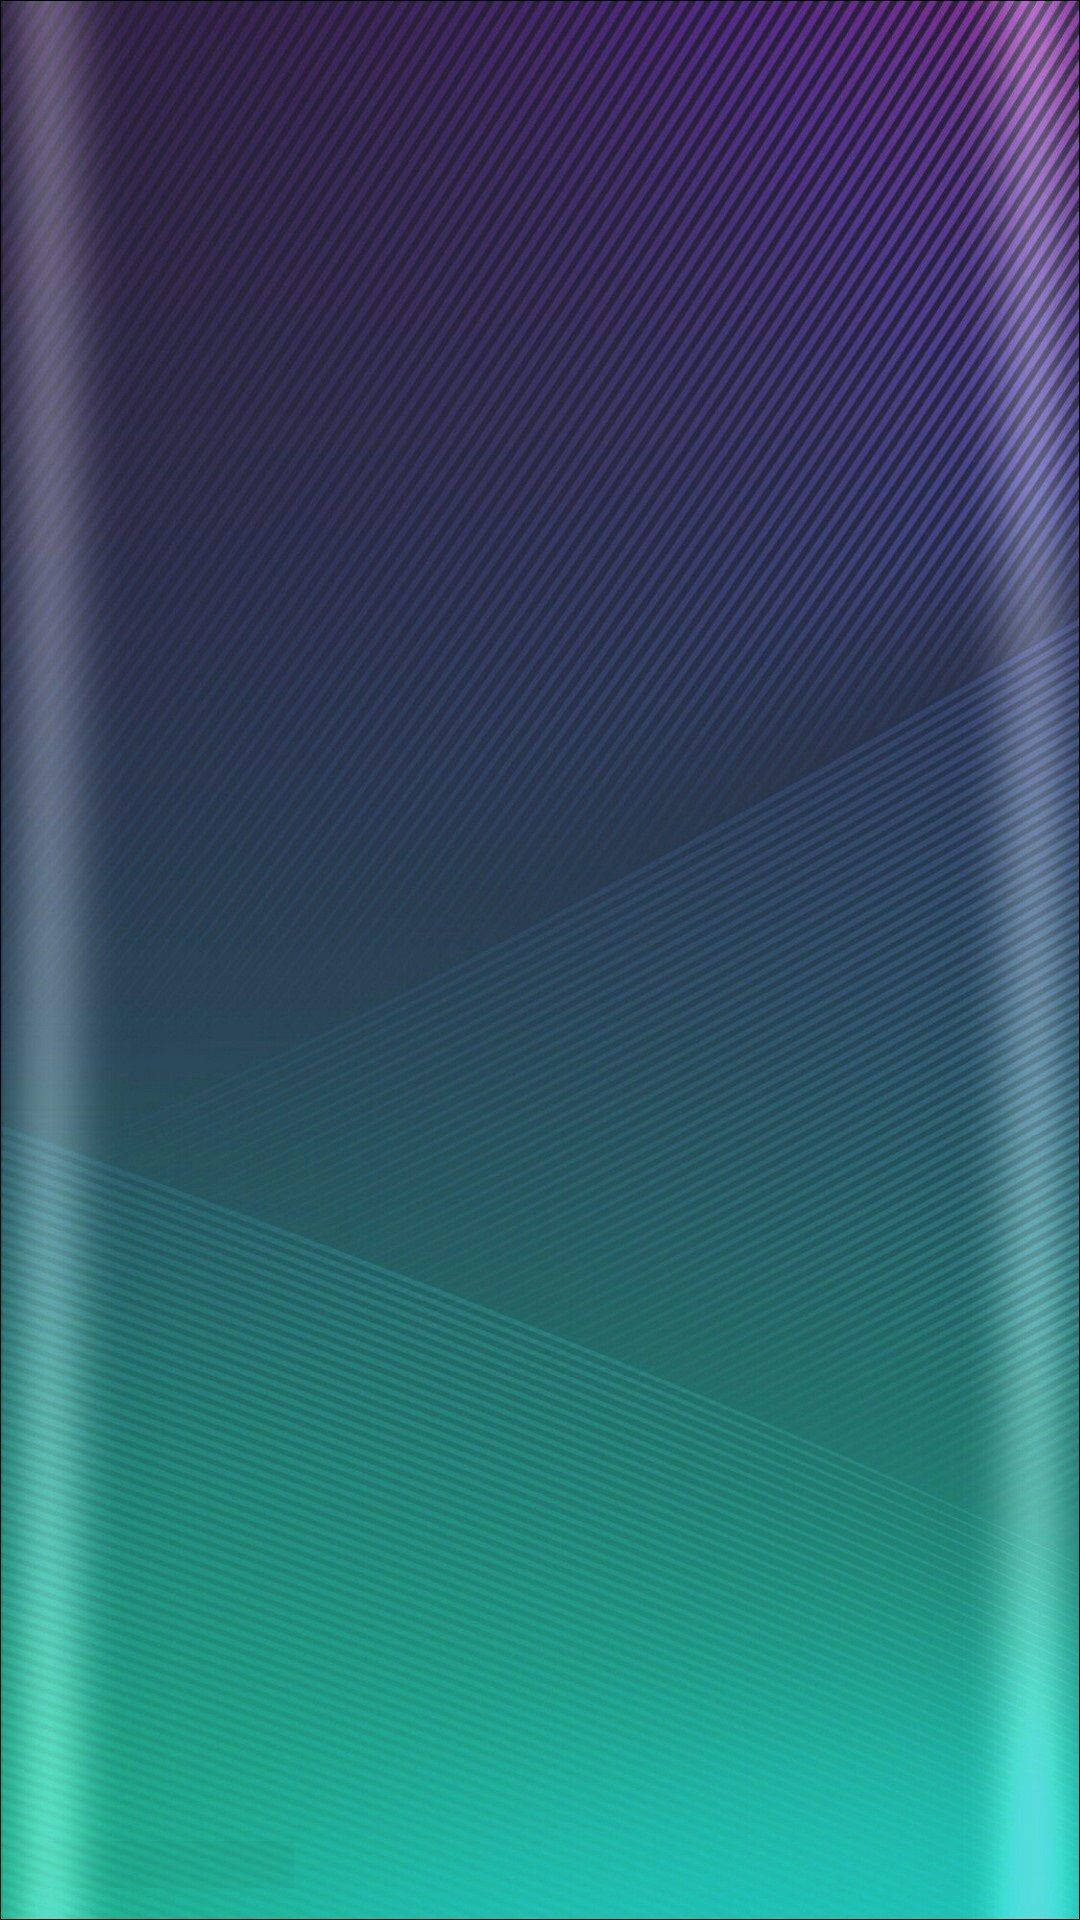 Glossy Purple And Green Color Iphone Background